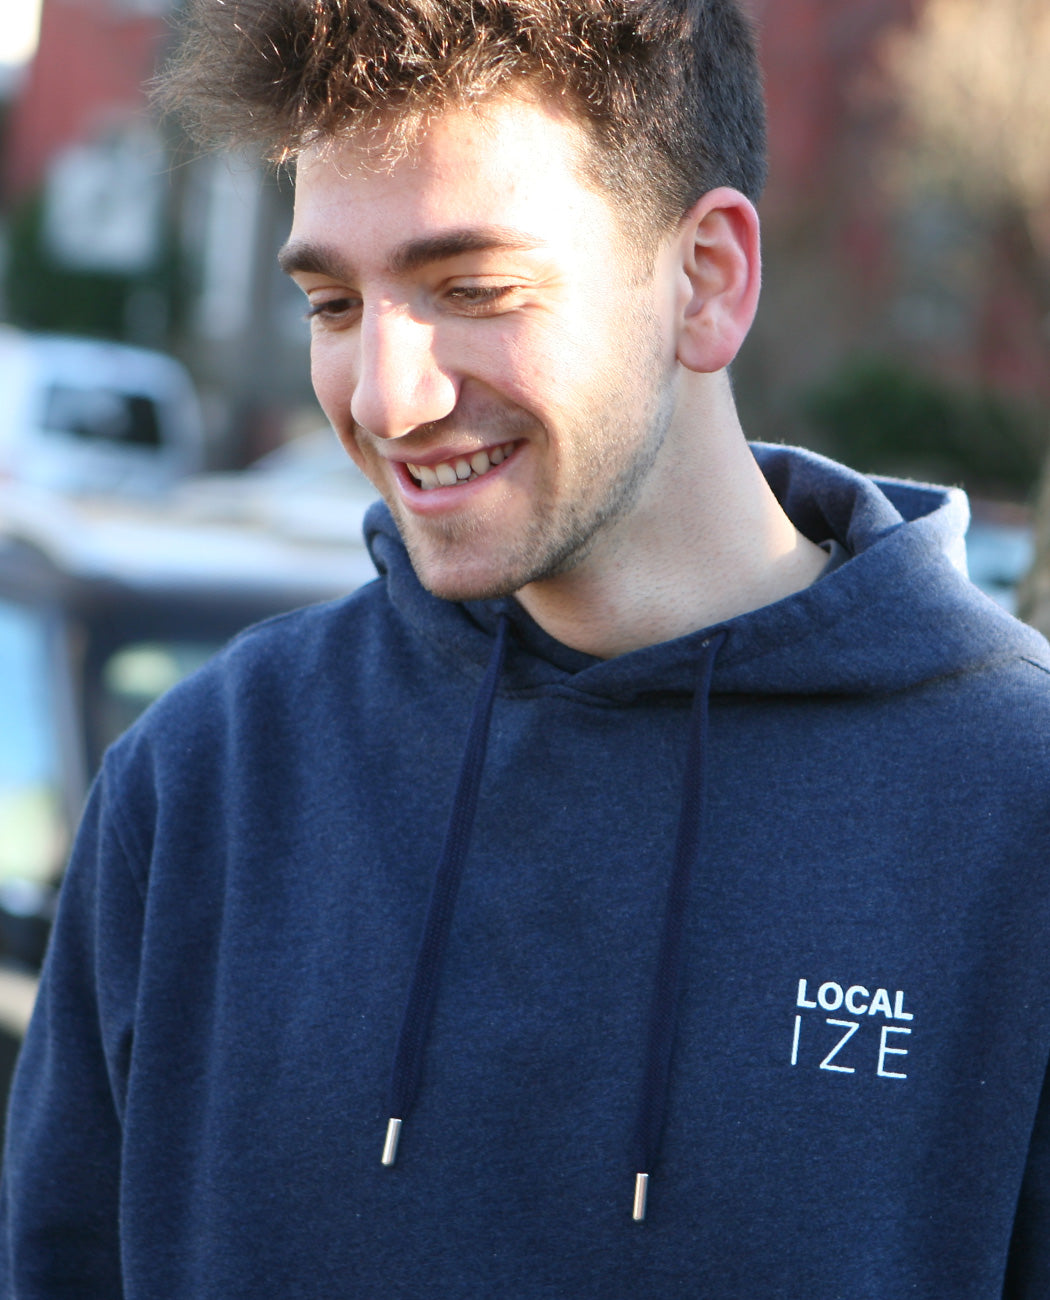 Hooded Sweater "Localize"